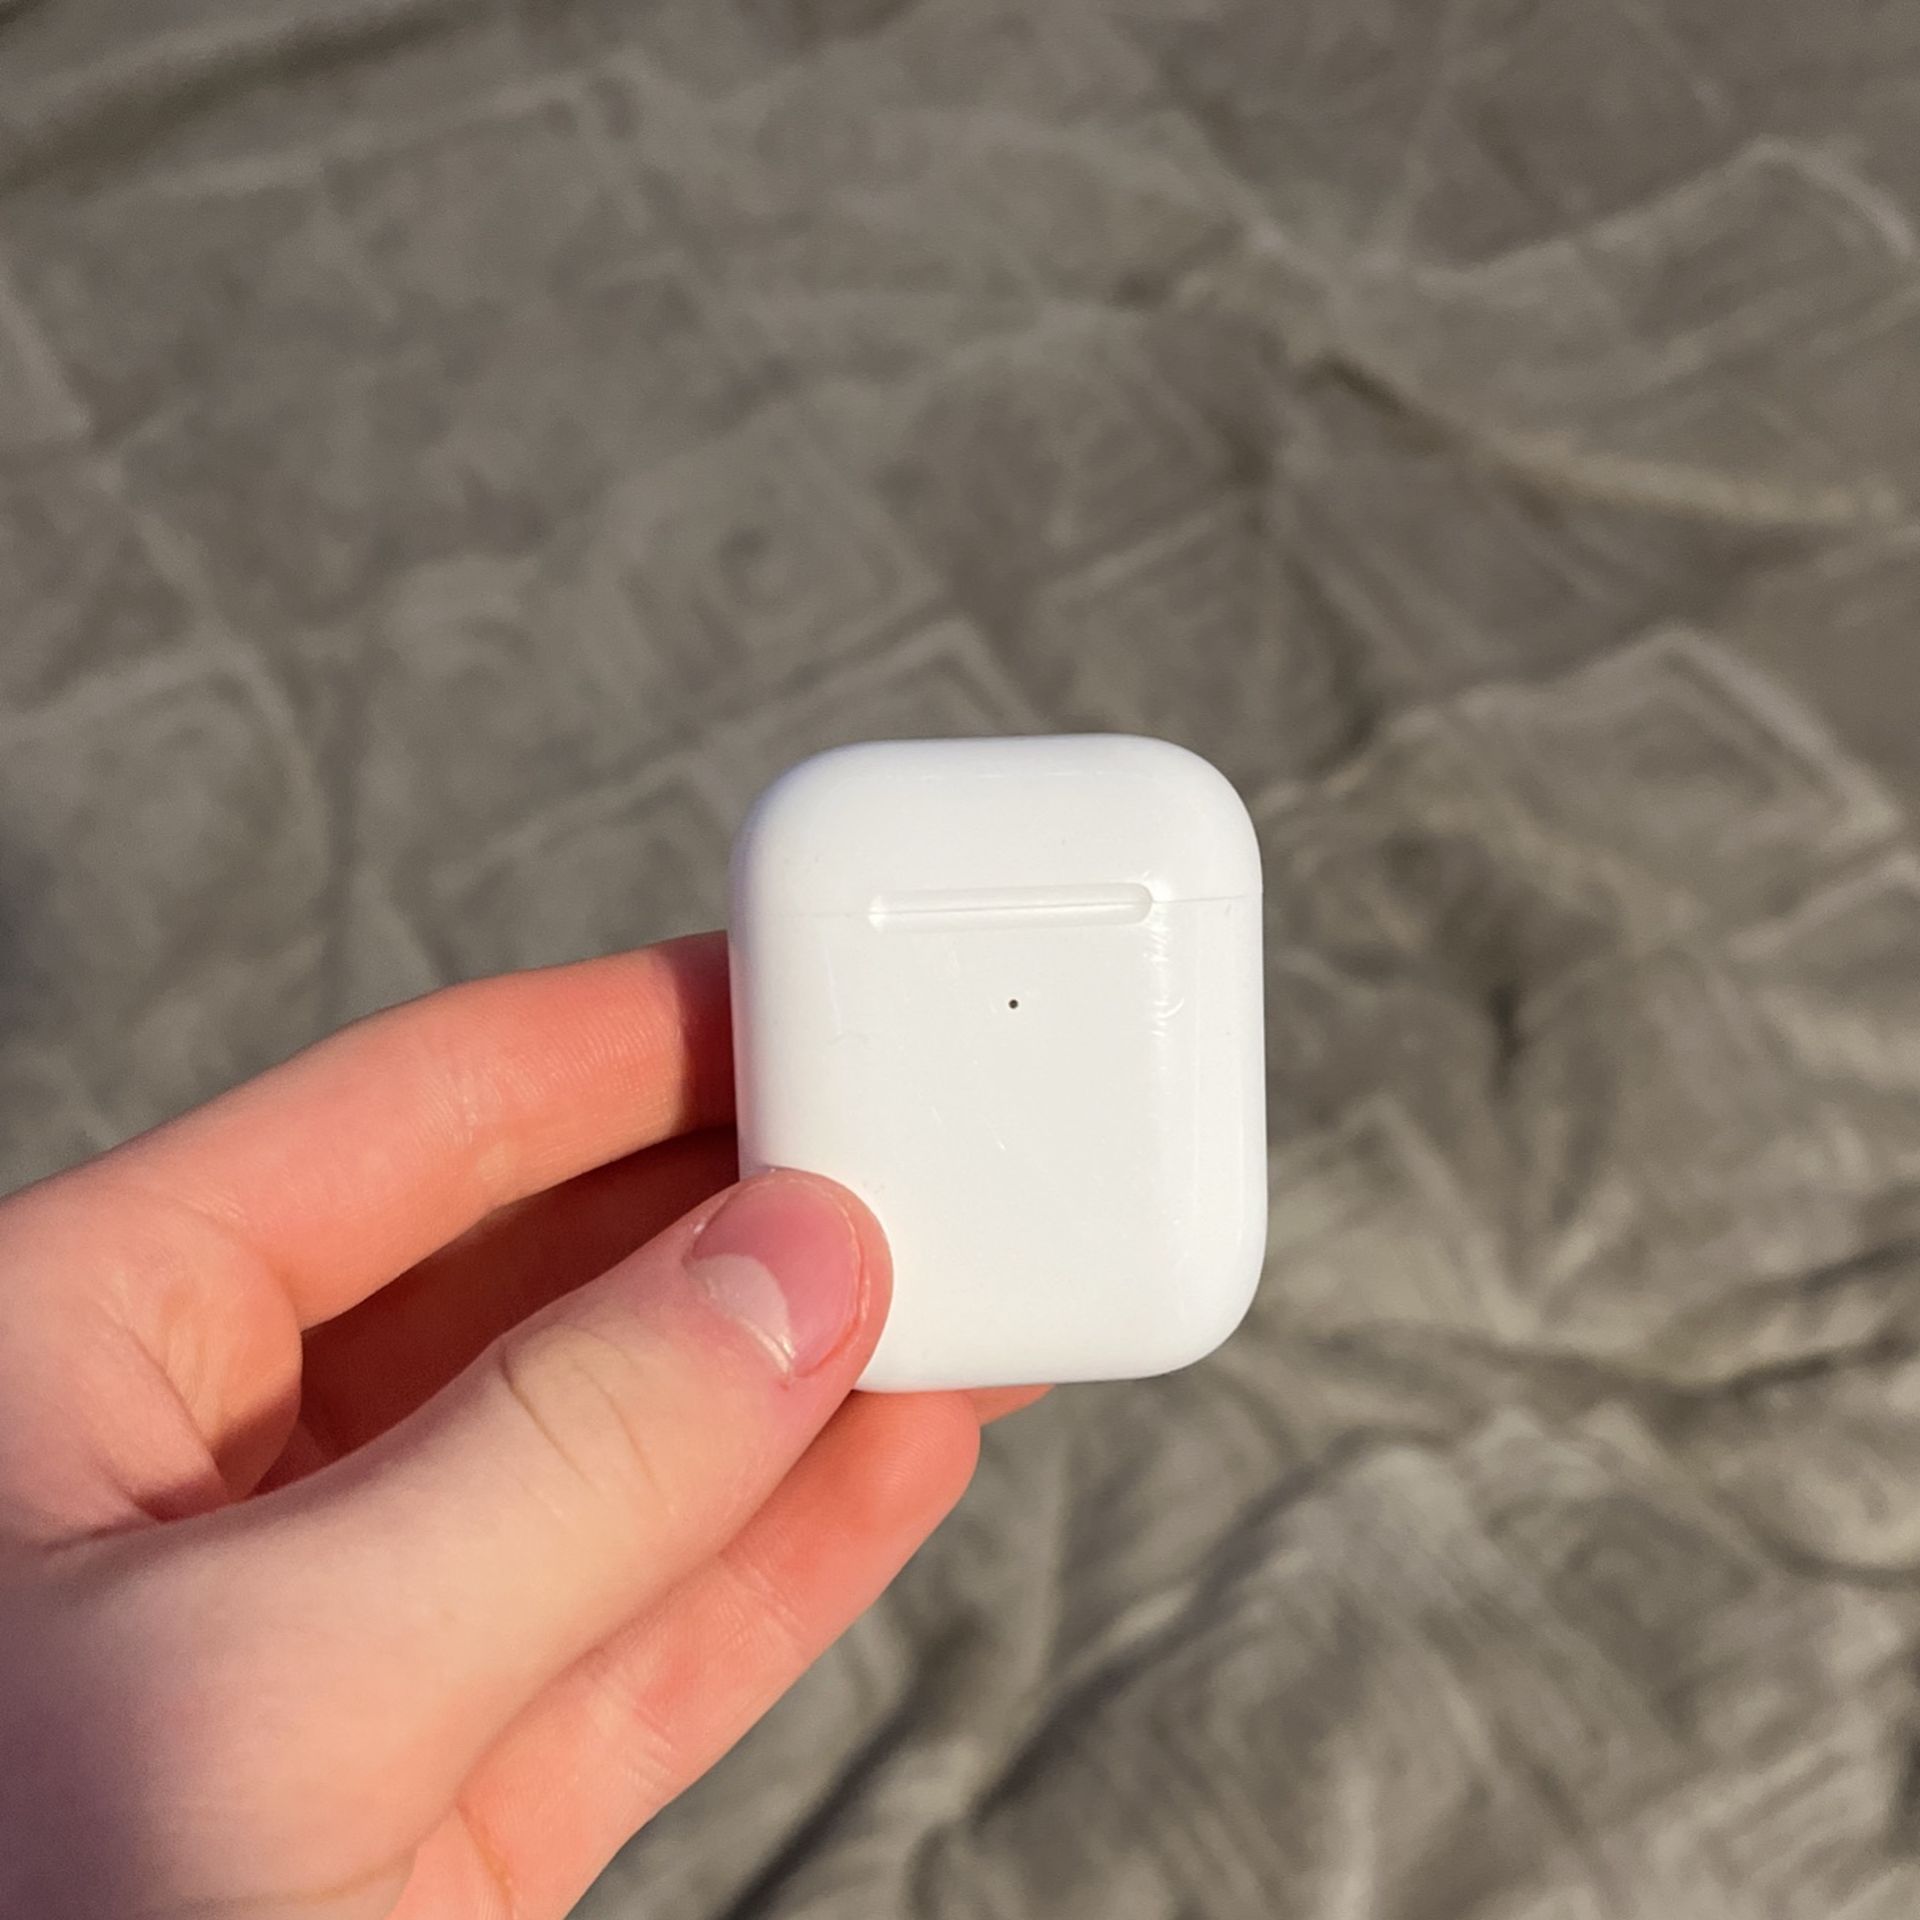 ✅AirPods 2nd Generation ✅ GIVE ME GOOD OFFERS 